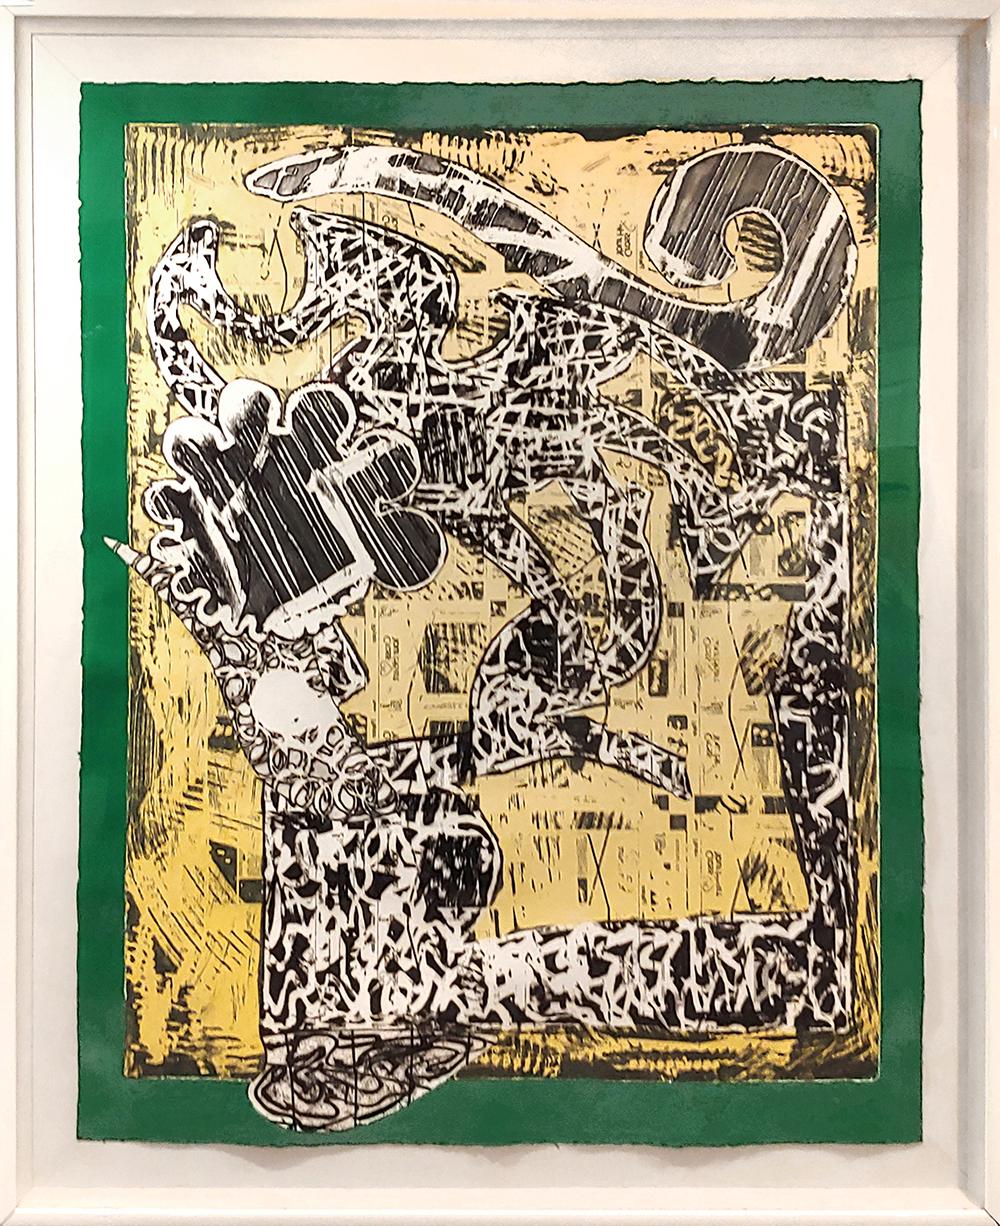 Frank Stella Abstract Print - "Green Journal" 76x62x3 Framed etching, screenprint, & Relief Edition of only 25